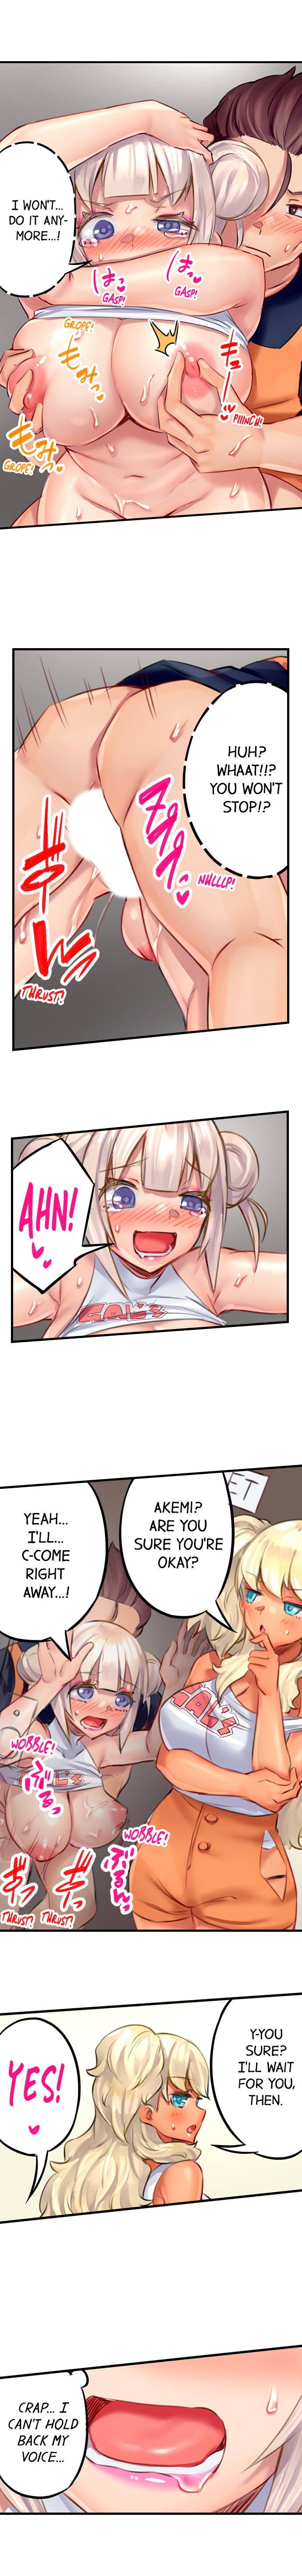 Orgasm Management for This Tanned Girl - Chapter 18 Page 7